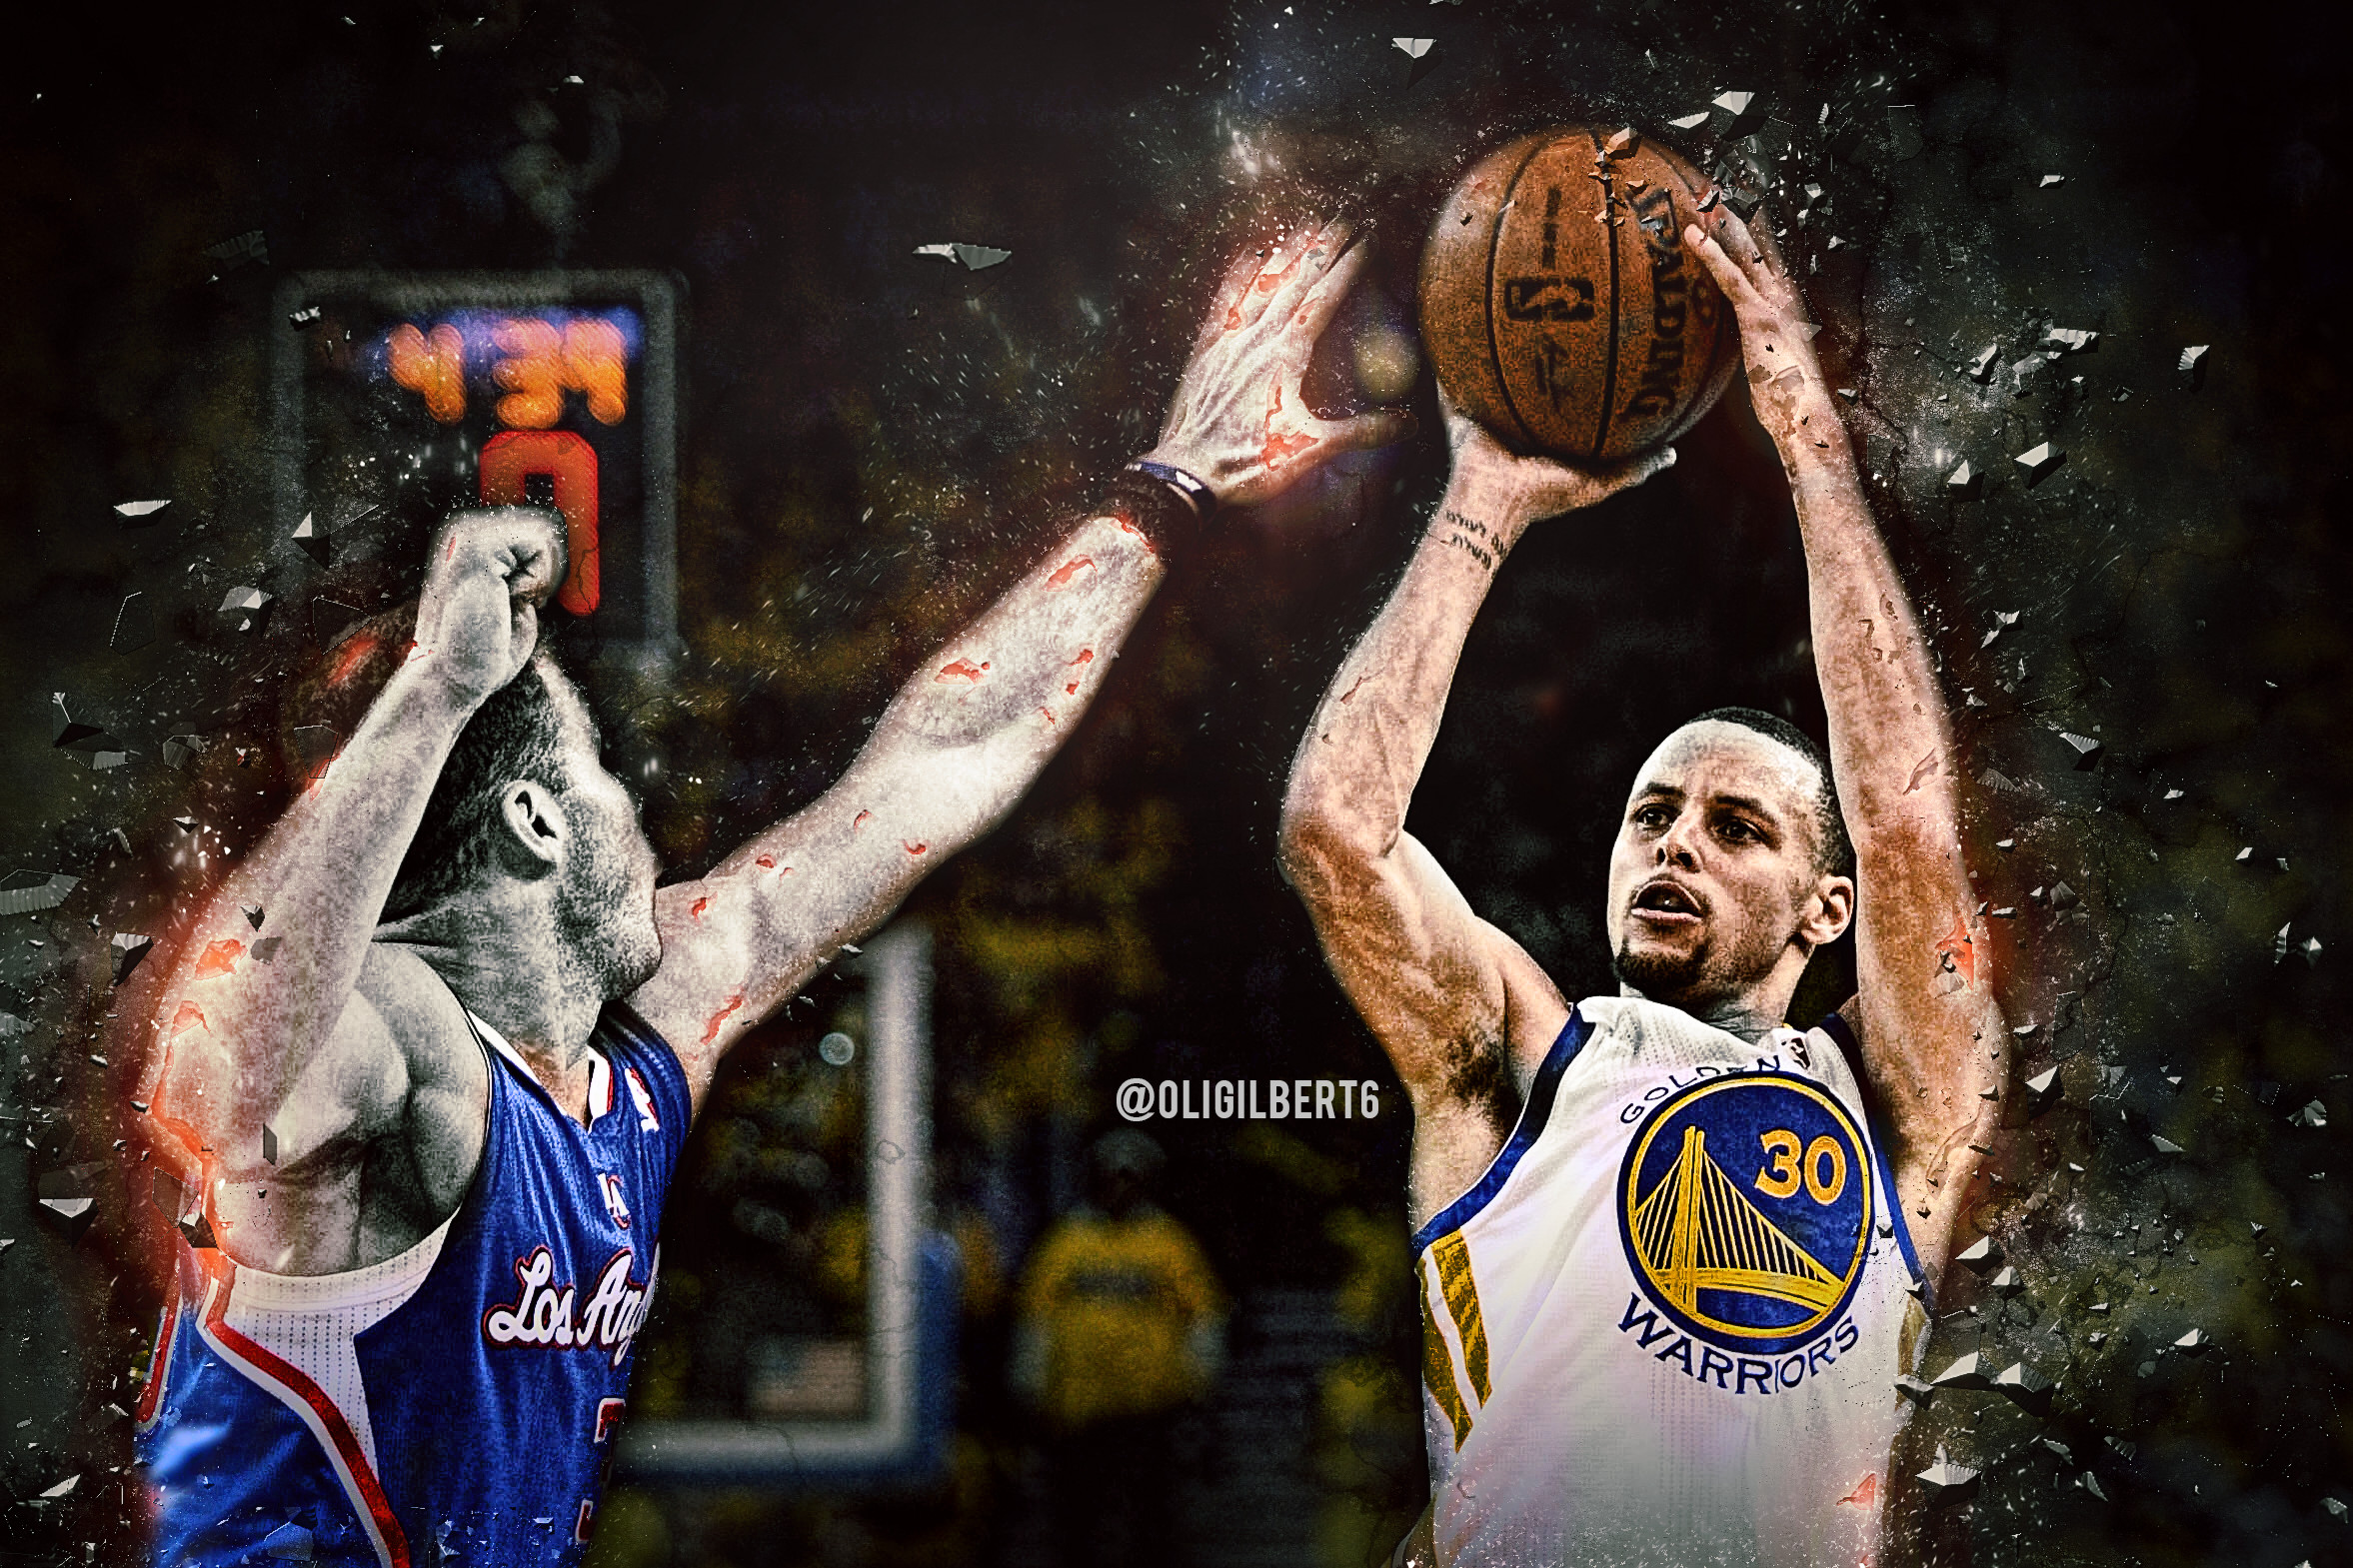 2354x1569 Stephen Curry Wallpaper by Hecziaa Stephen Curry Wallpaper by Hecziaa  